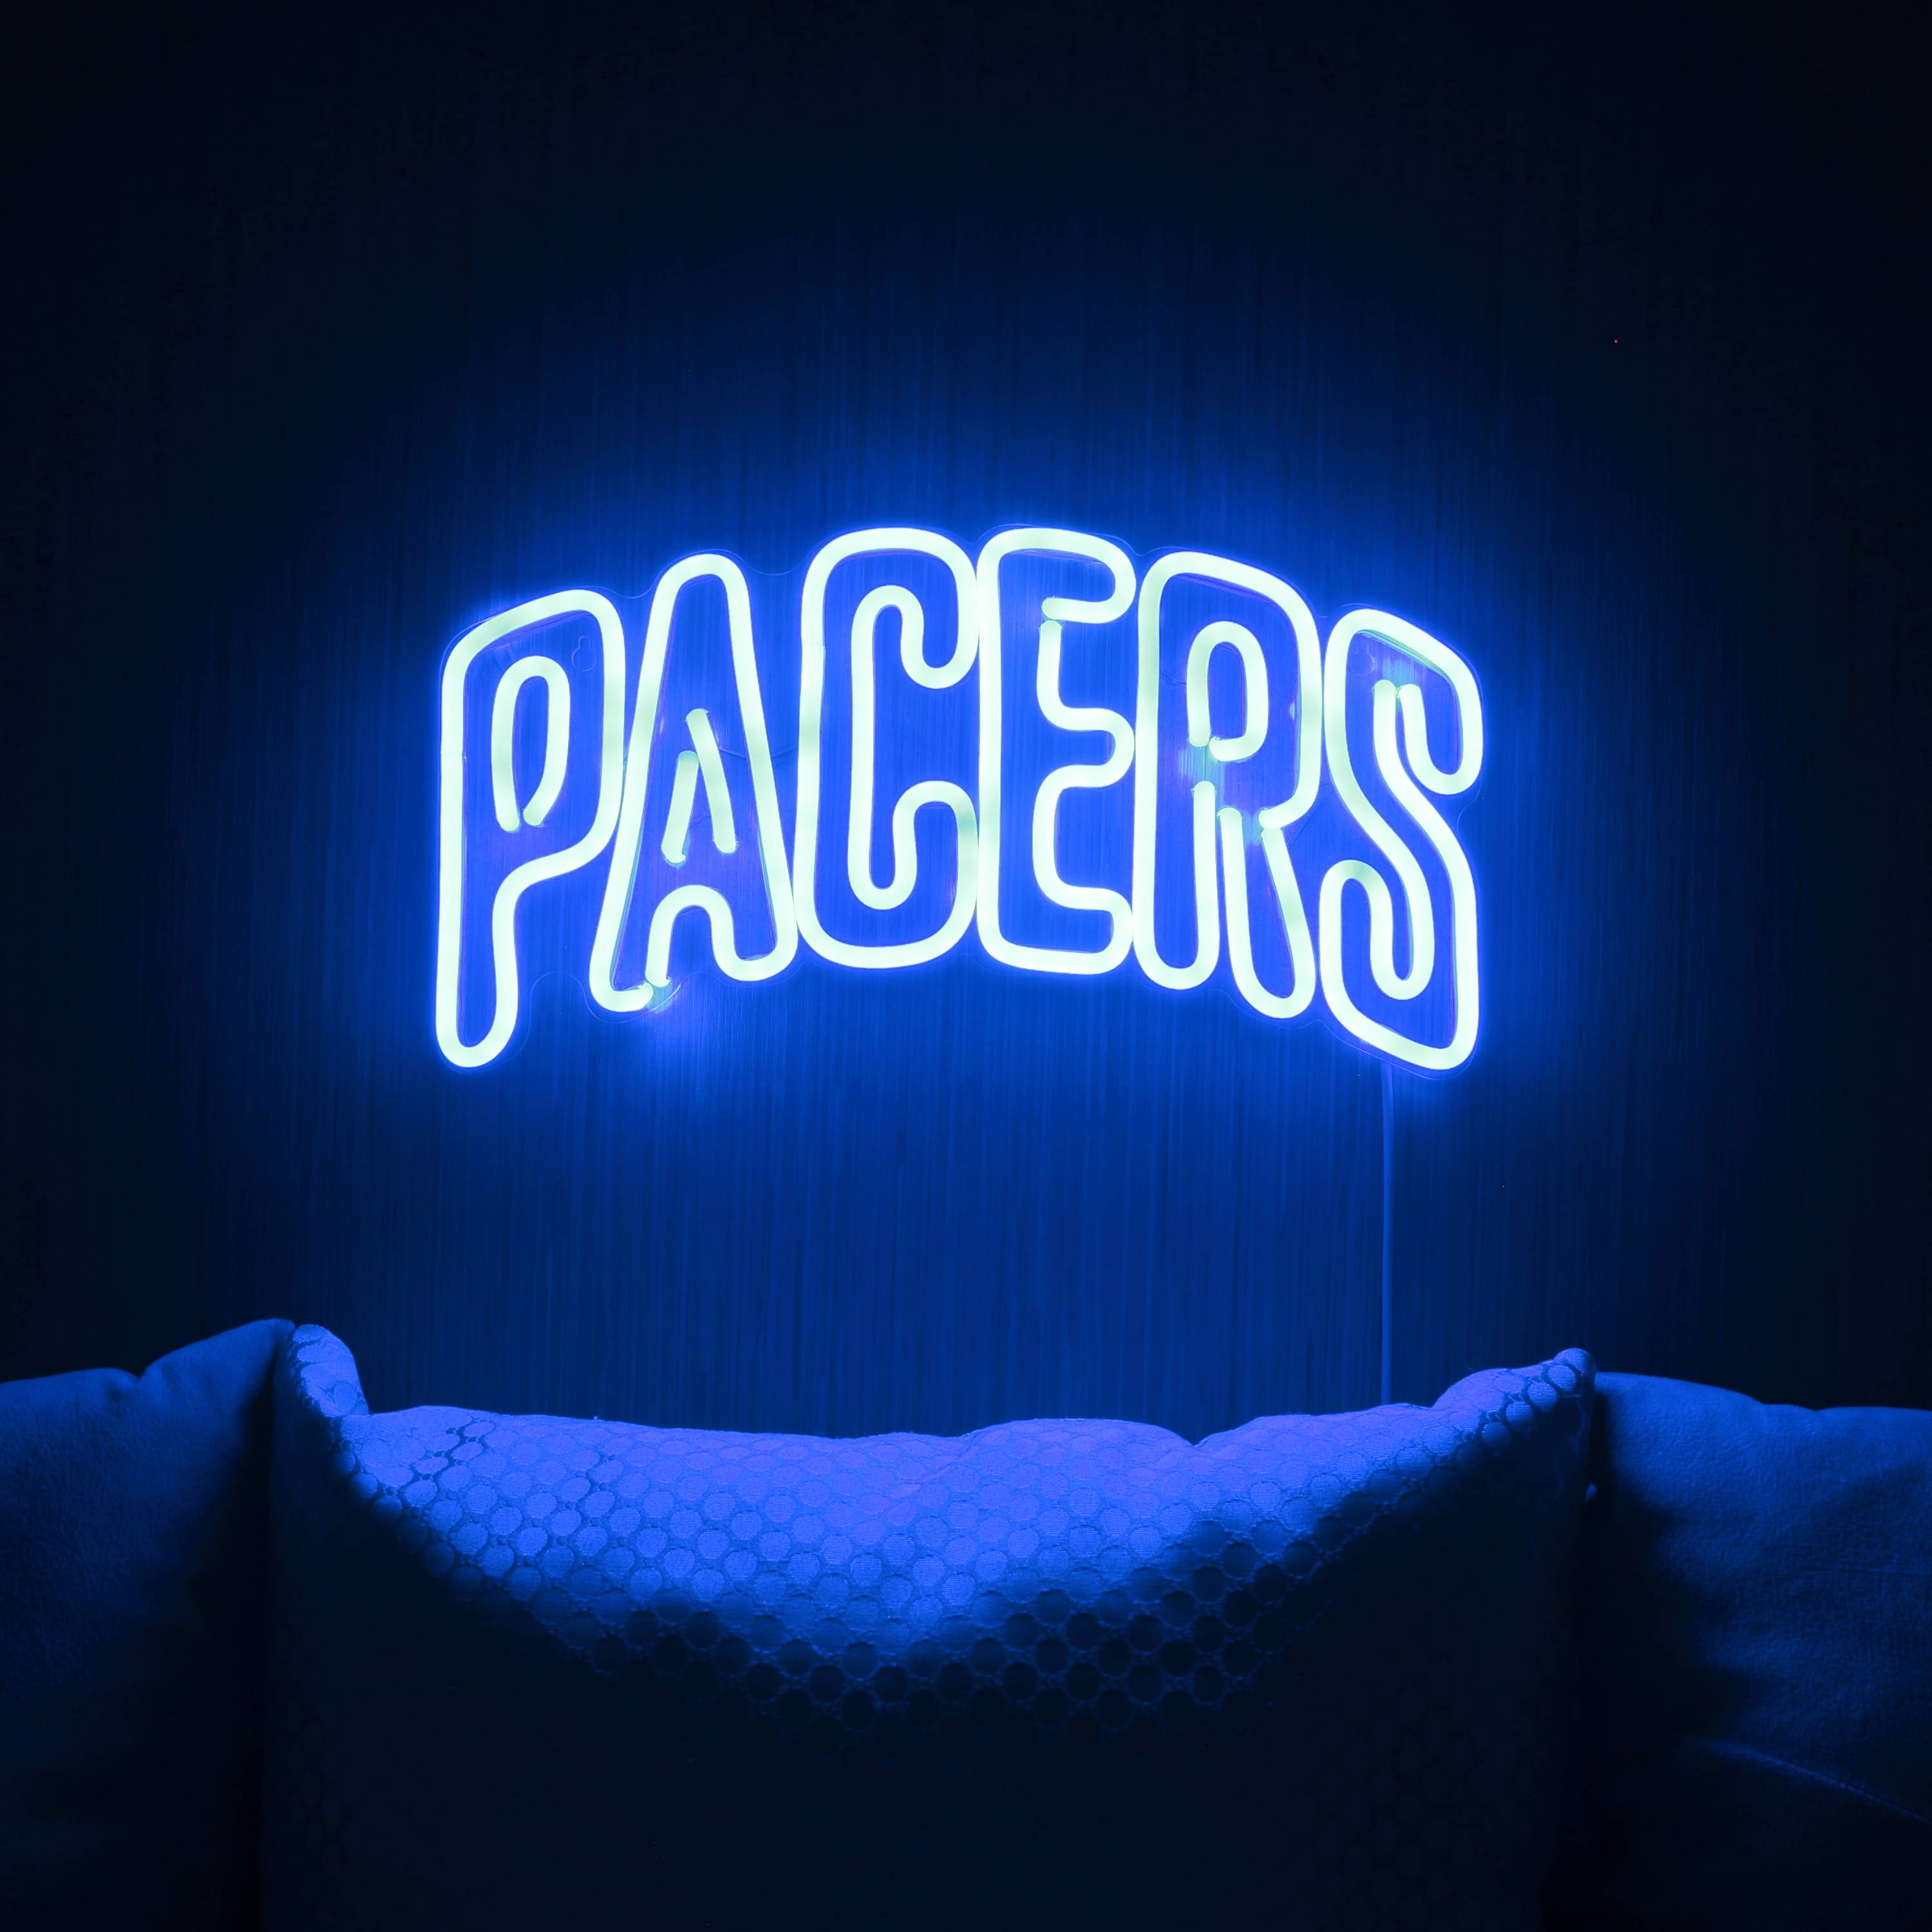 NBA Indiana Pacers Large Flex Neon LED Sign